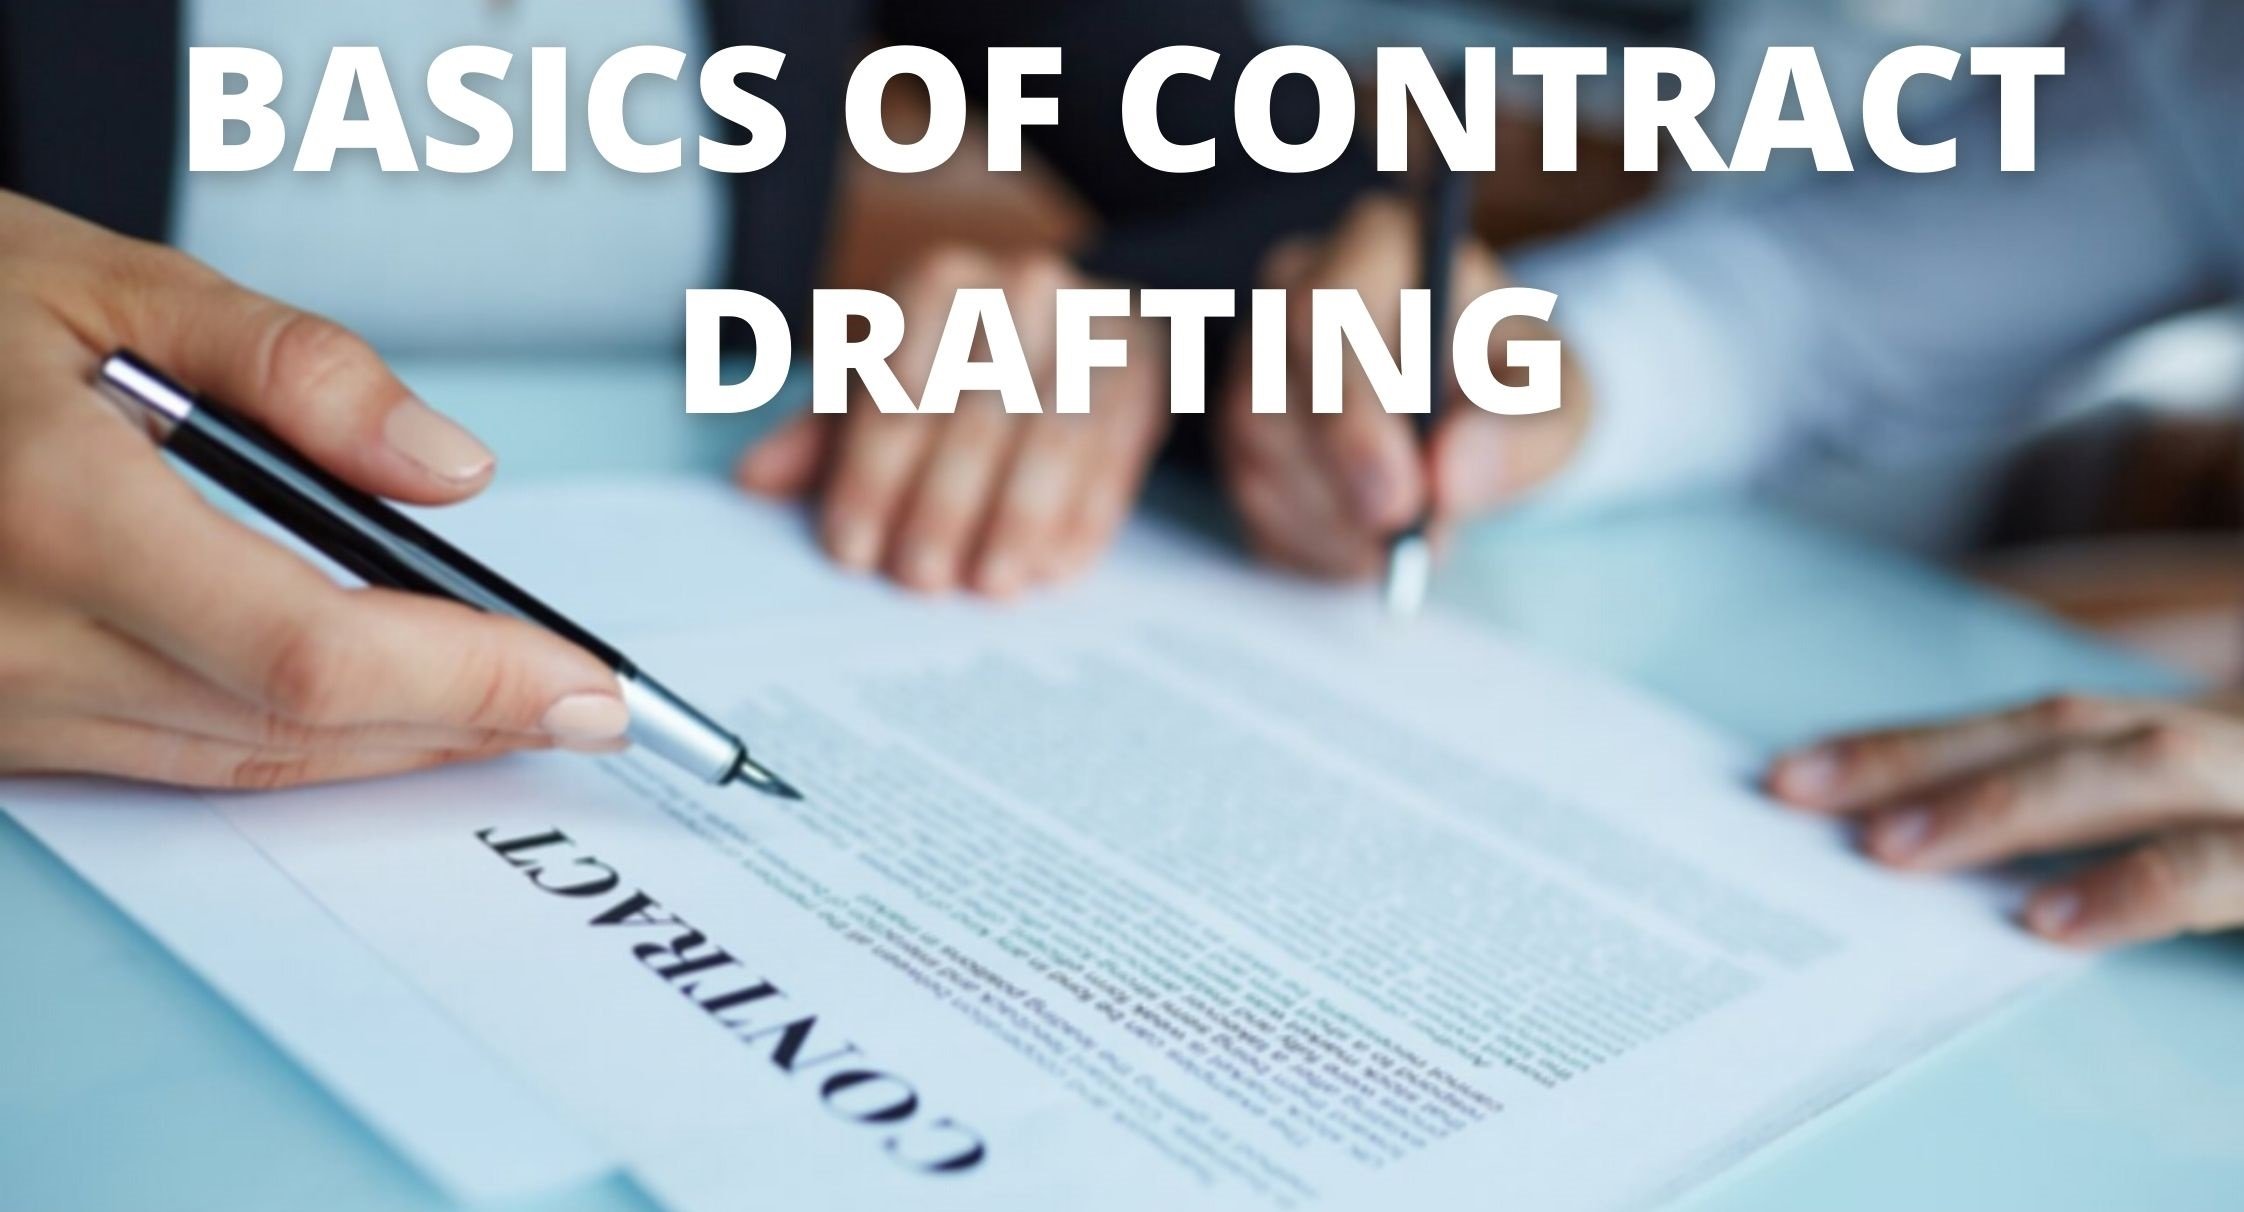 Basics of Contract Drafting